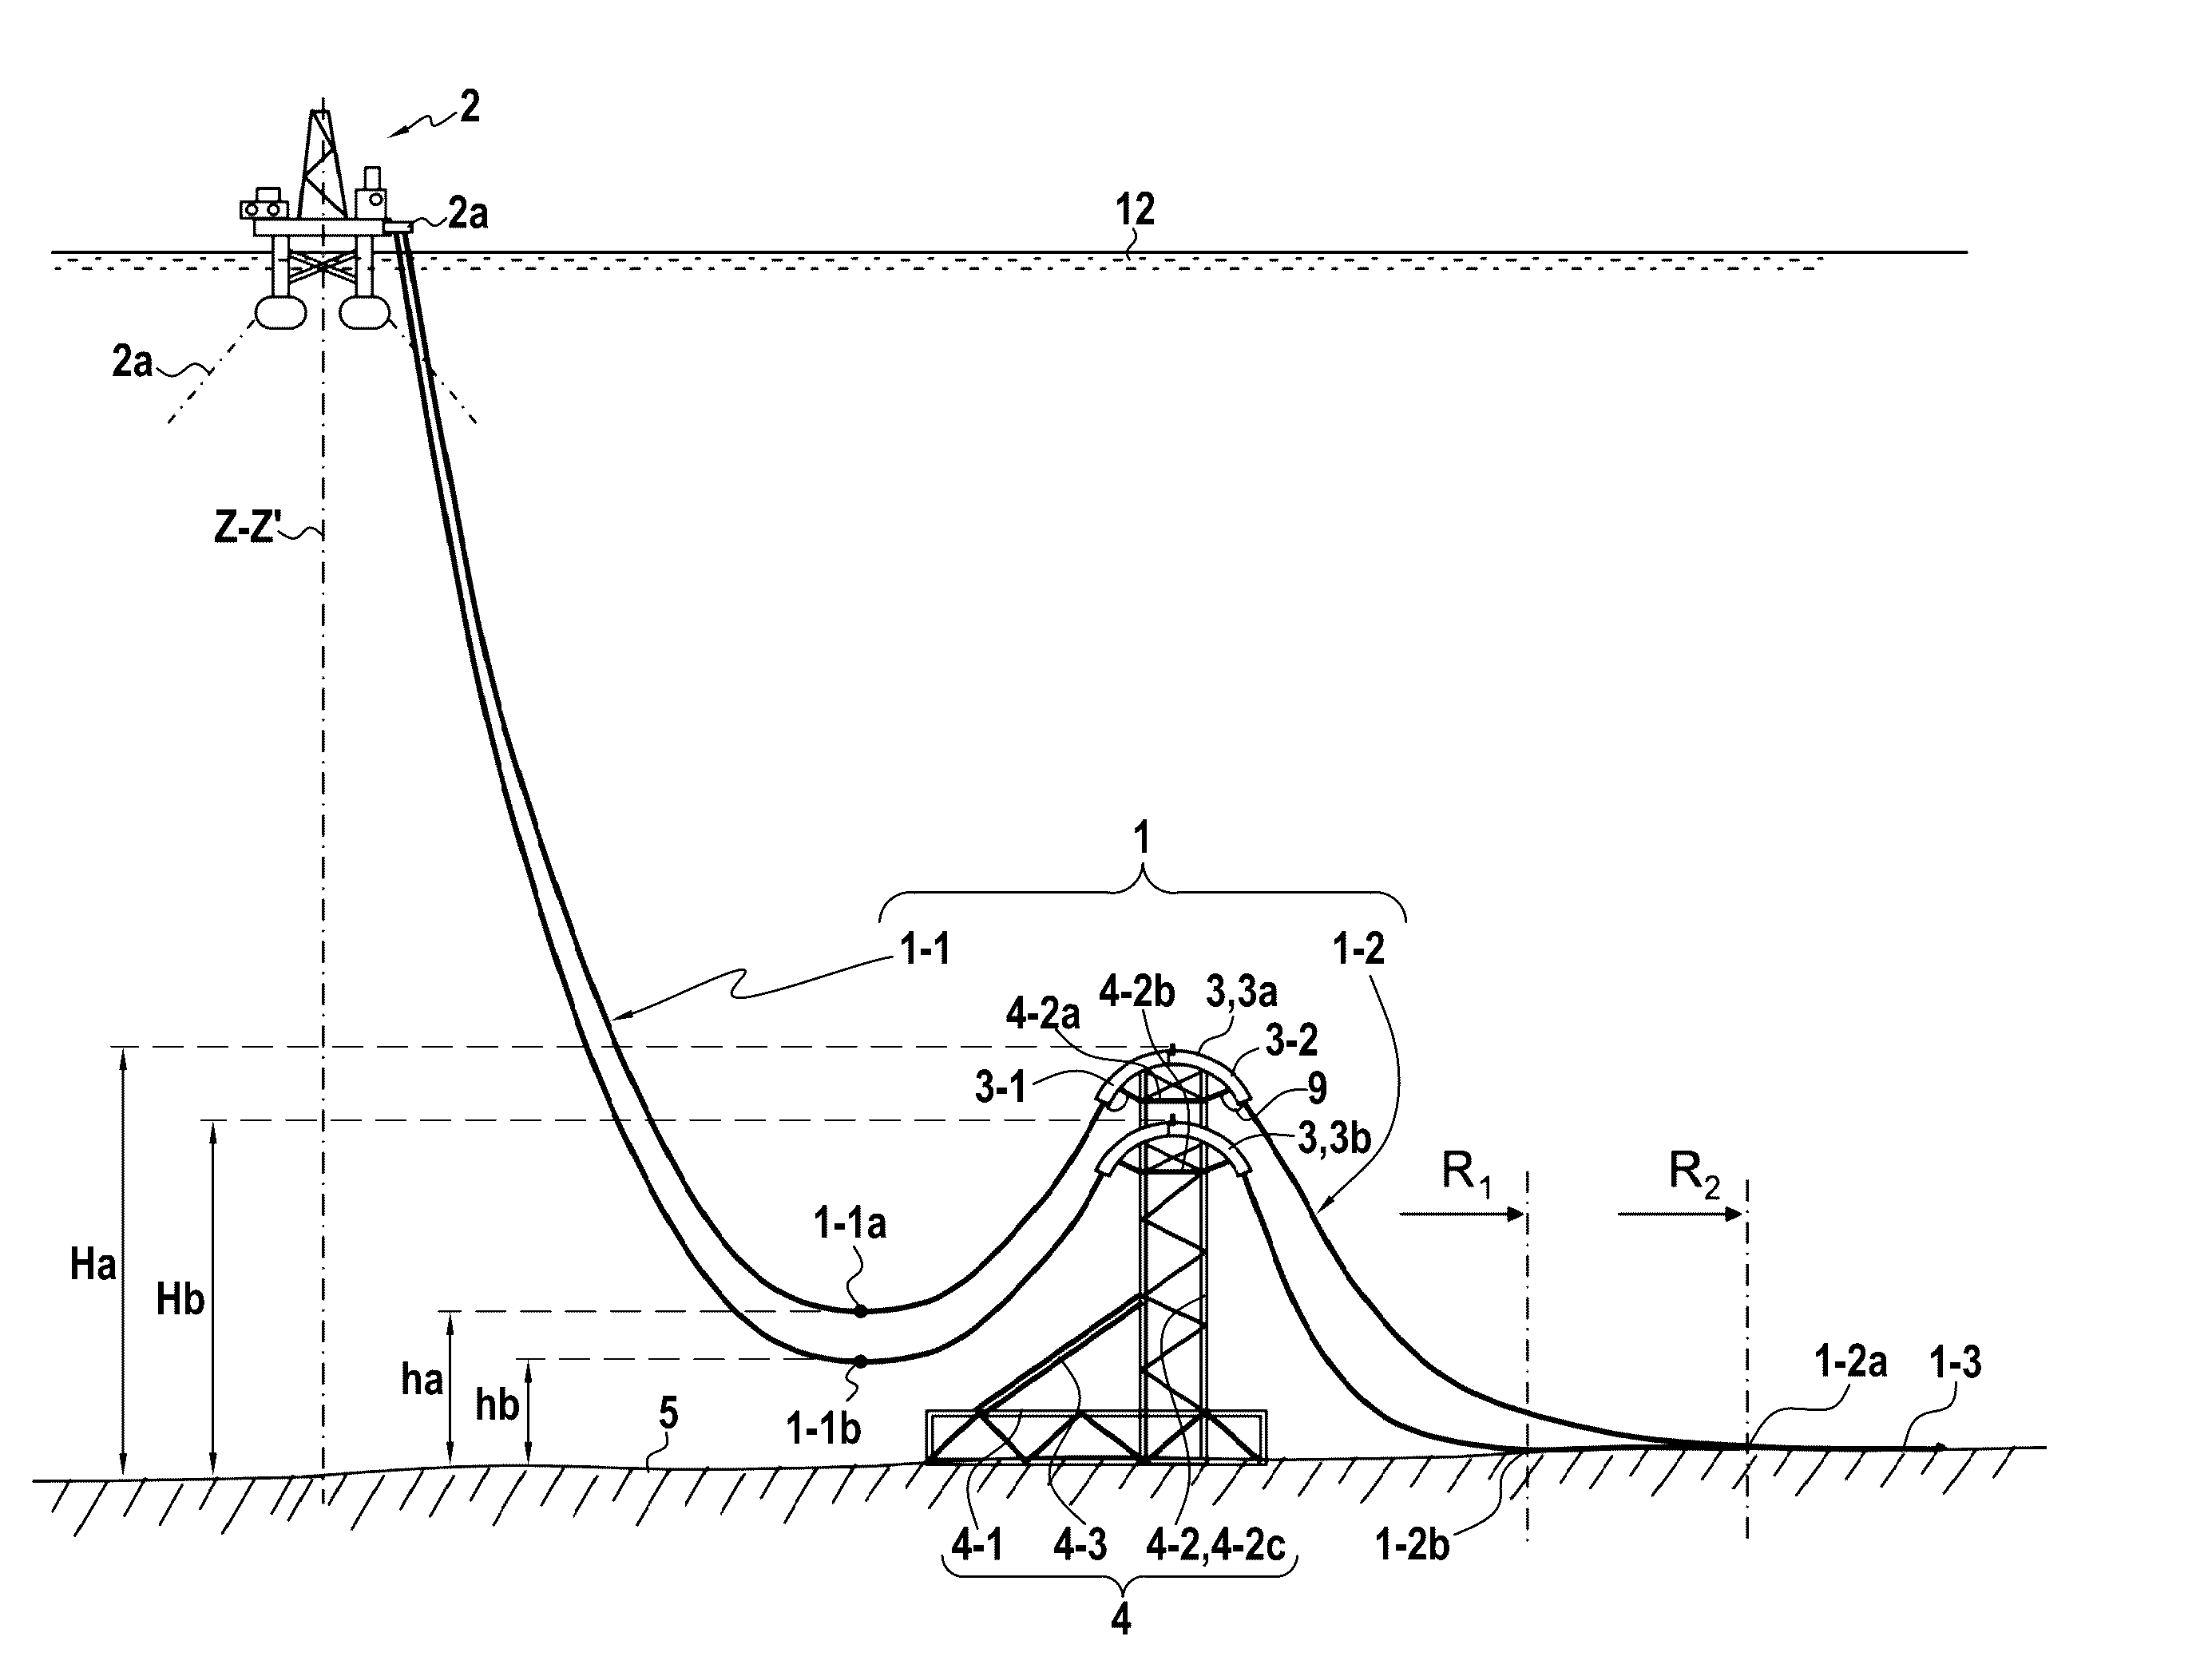 Multiple flexible seafloor-surface linking apparatus comprising at least two levels